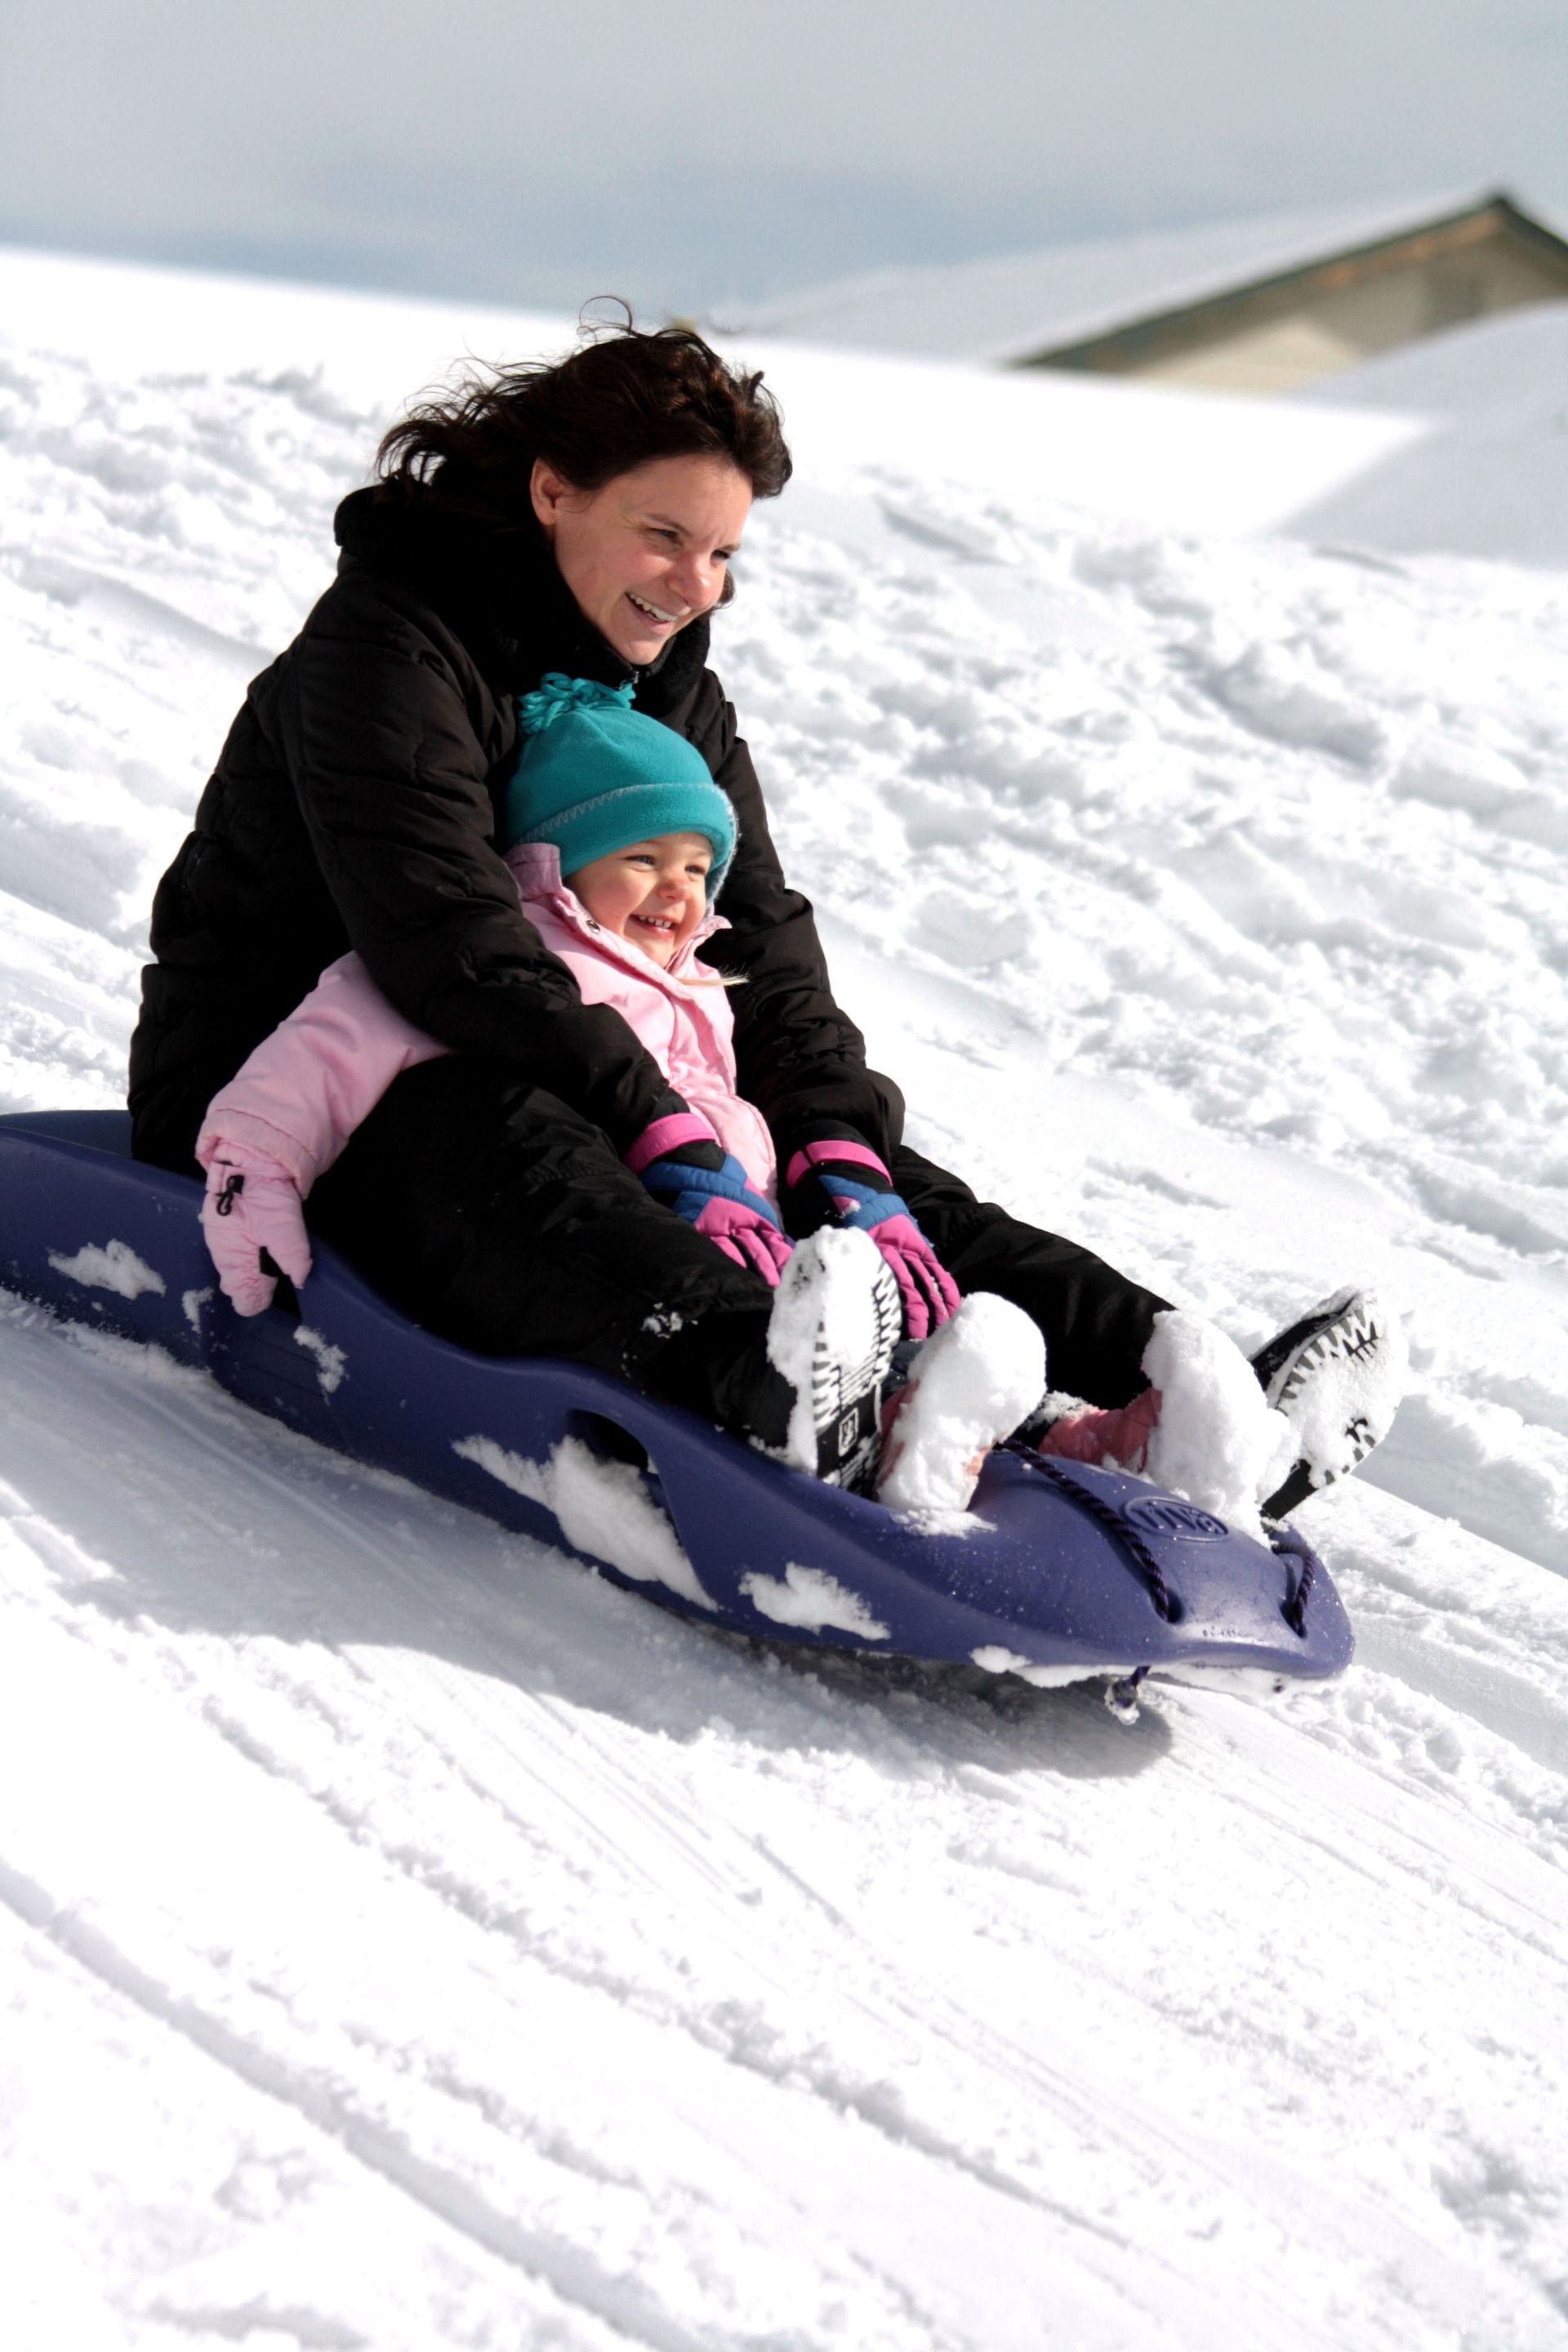 A mother and daughter sled down a hill together.